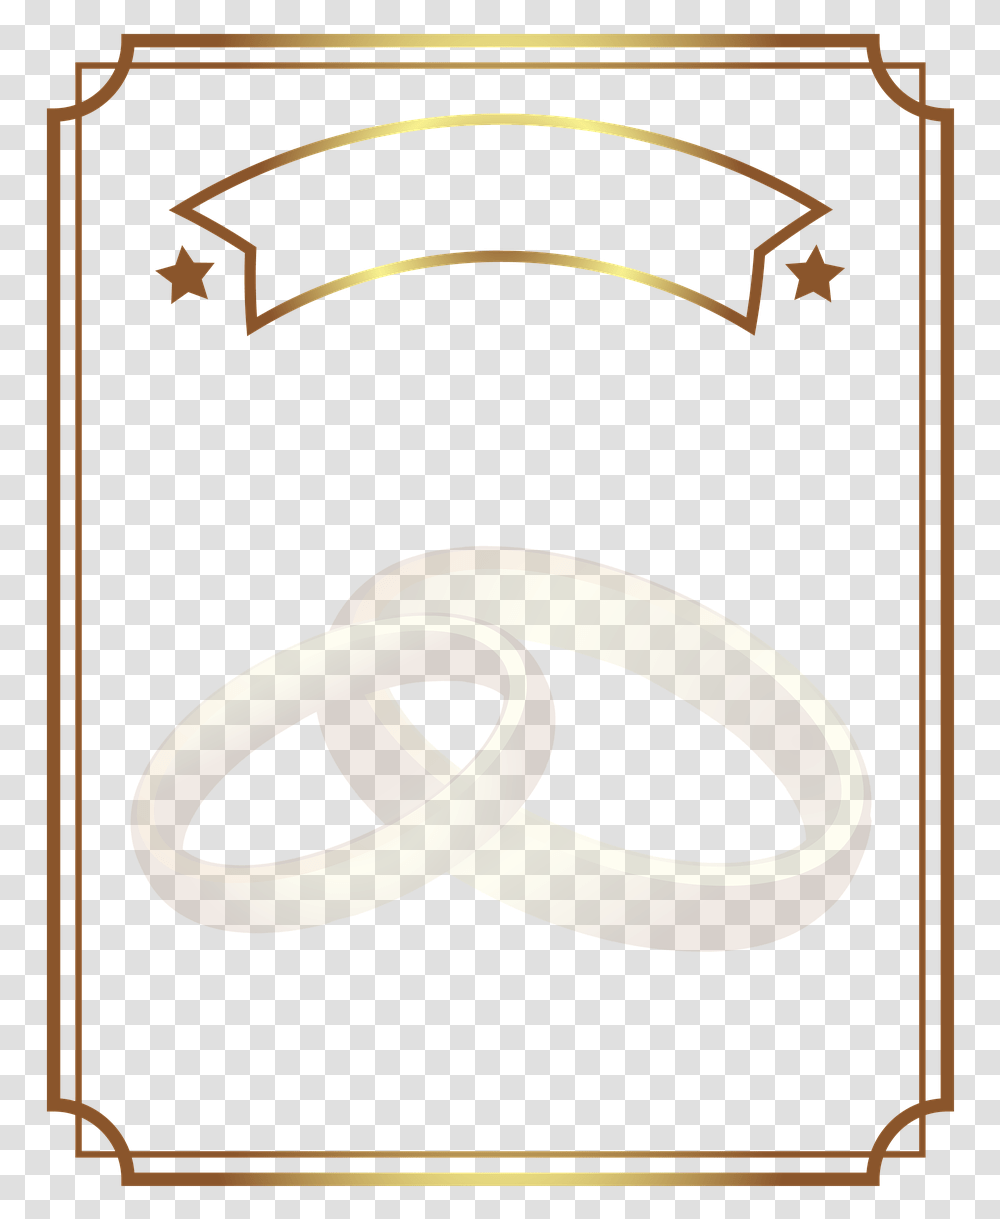 Diploma Gold Wedding Rings Heart Wedding Frame Gold Svg, Jewelry, Accessories, Accessory Transparent Png